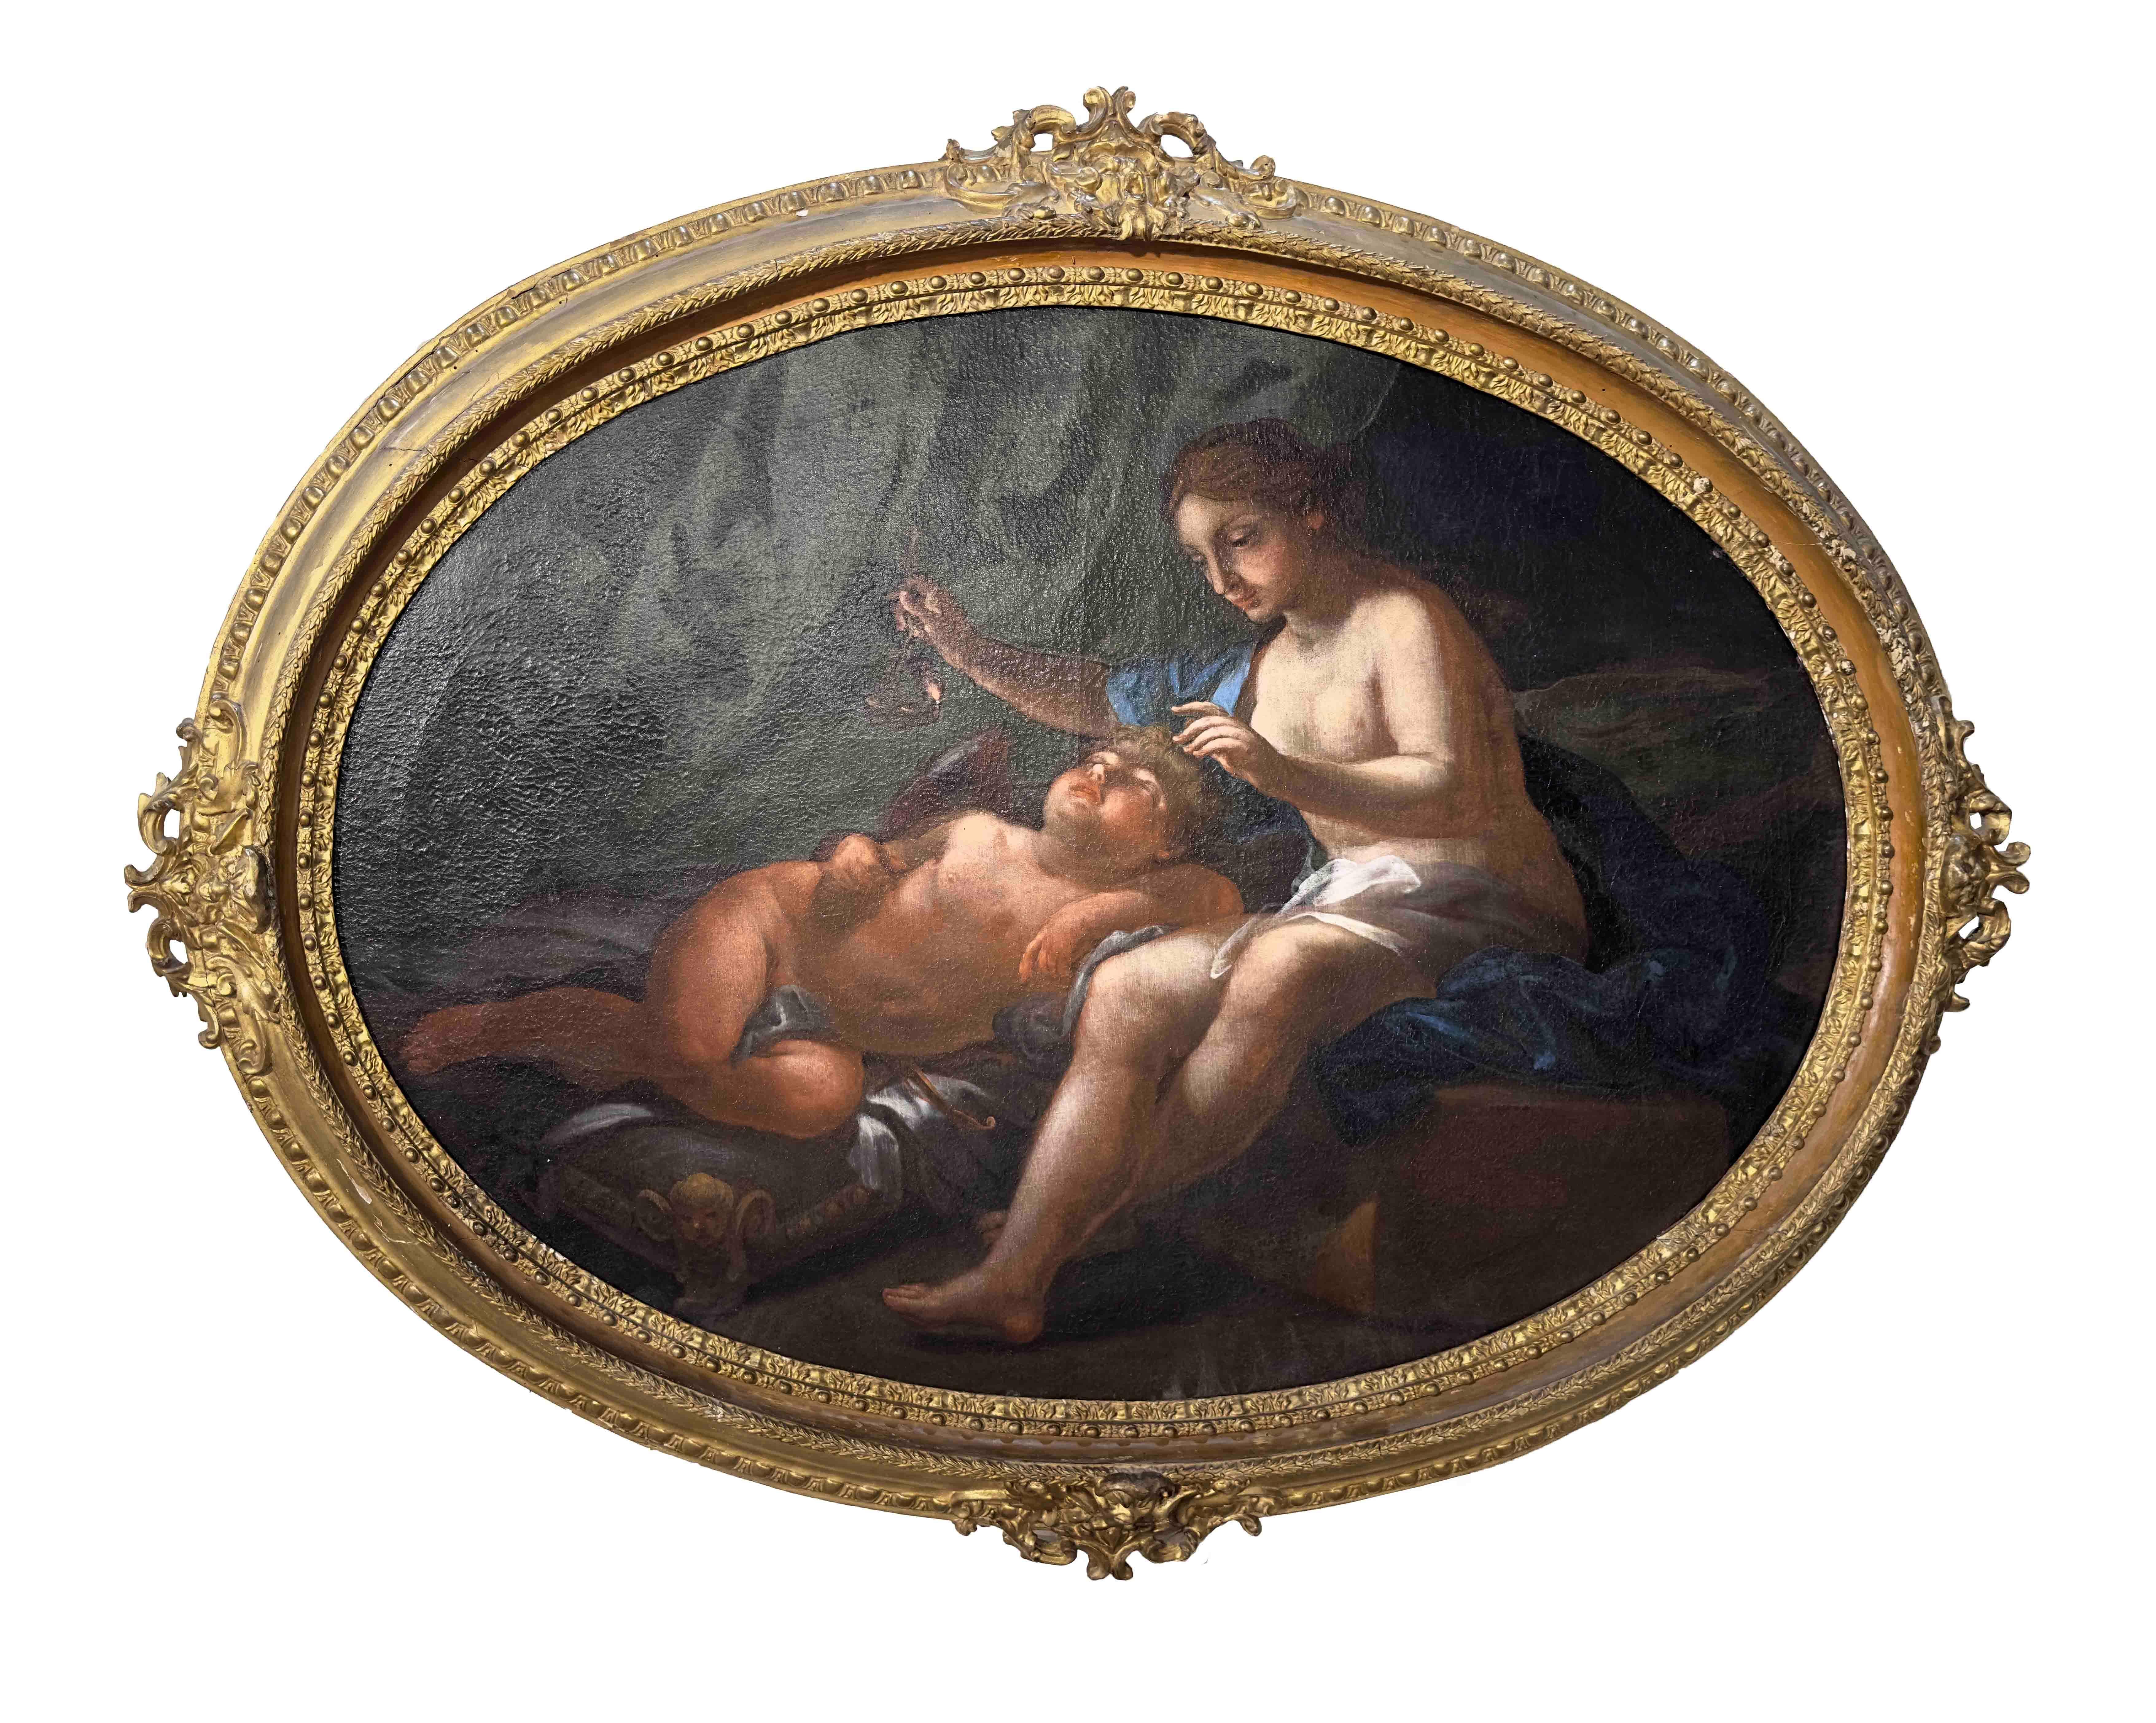 This beautiful oval painting, created using the oil on canvas technique, features a horizontal orientation and depicts the goddess Venus half-naked and sitting on a stool, while she watches over her son Cupid sleeping on a small bed. The goddess